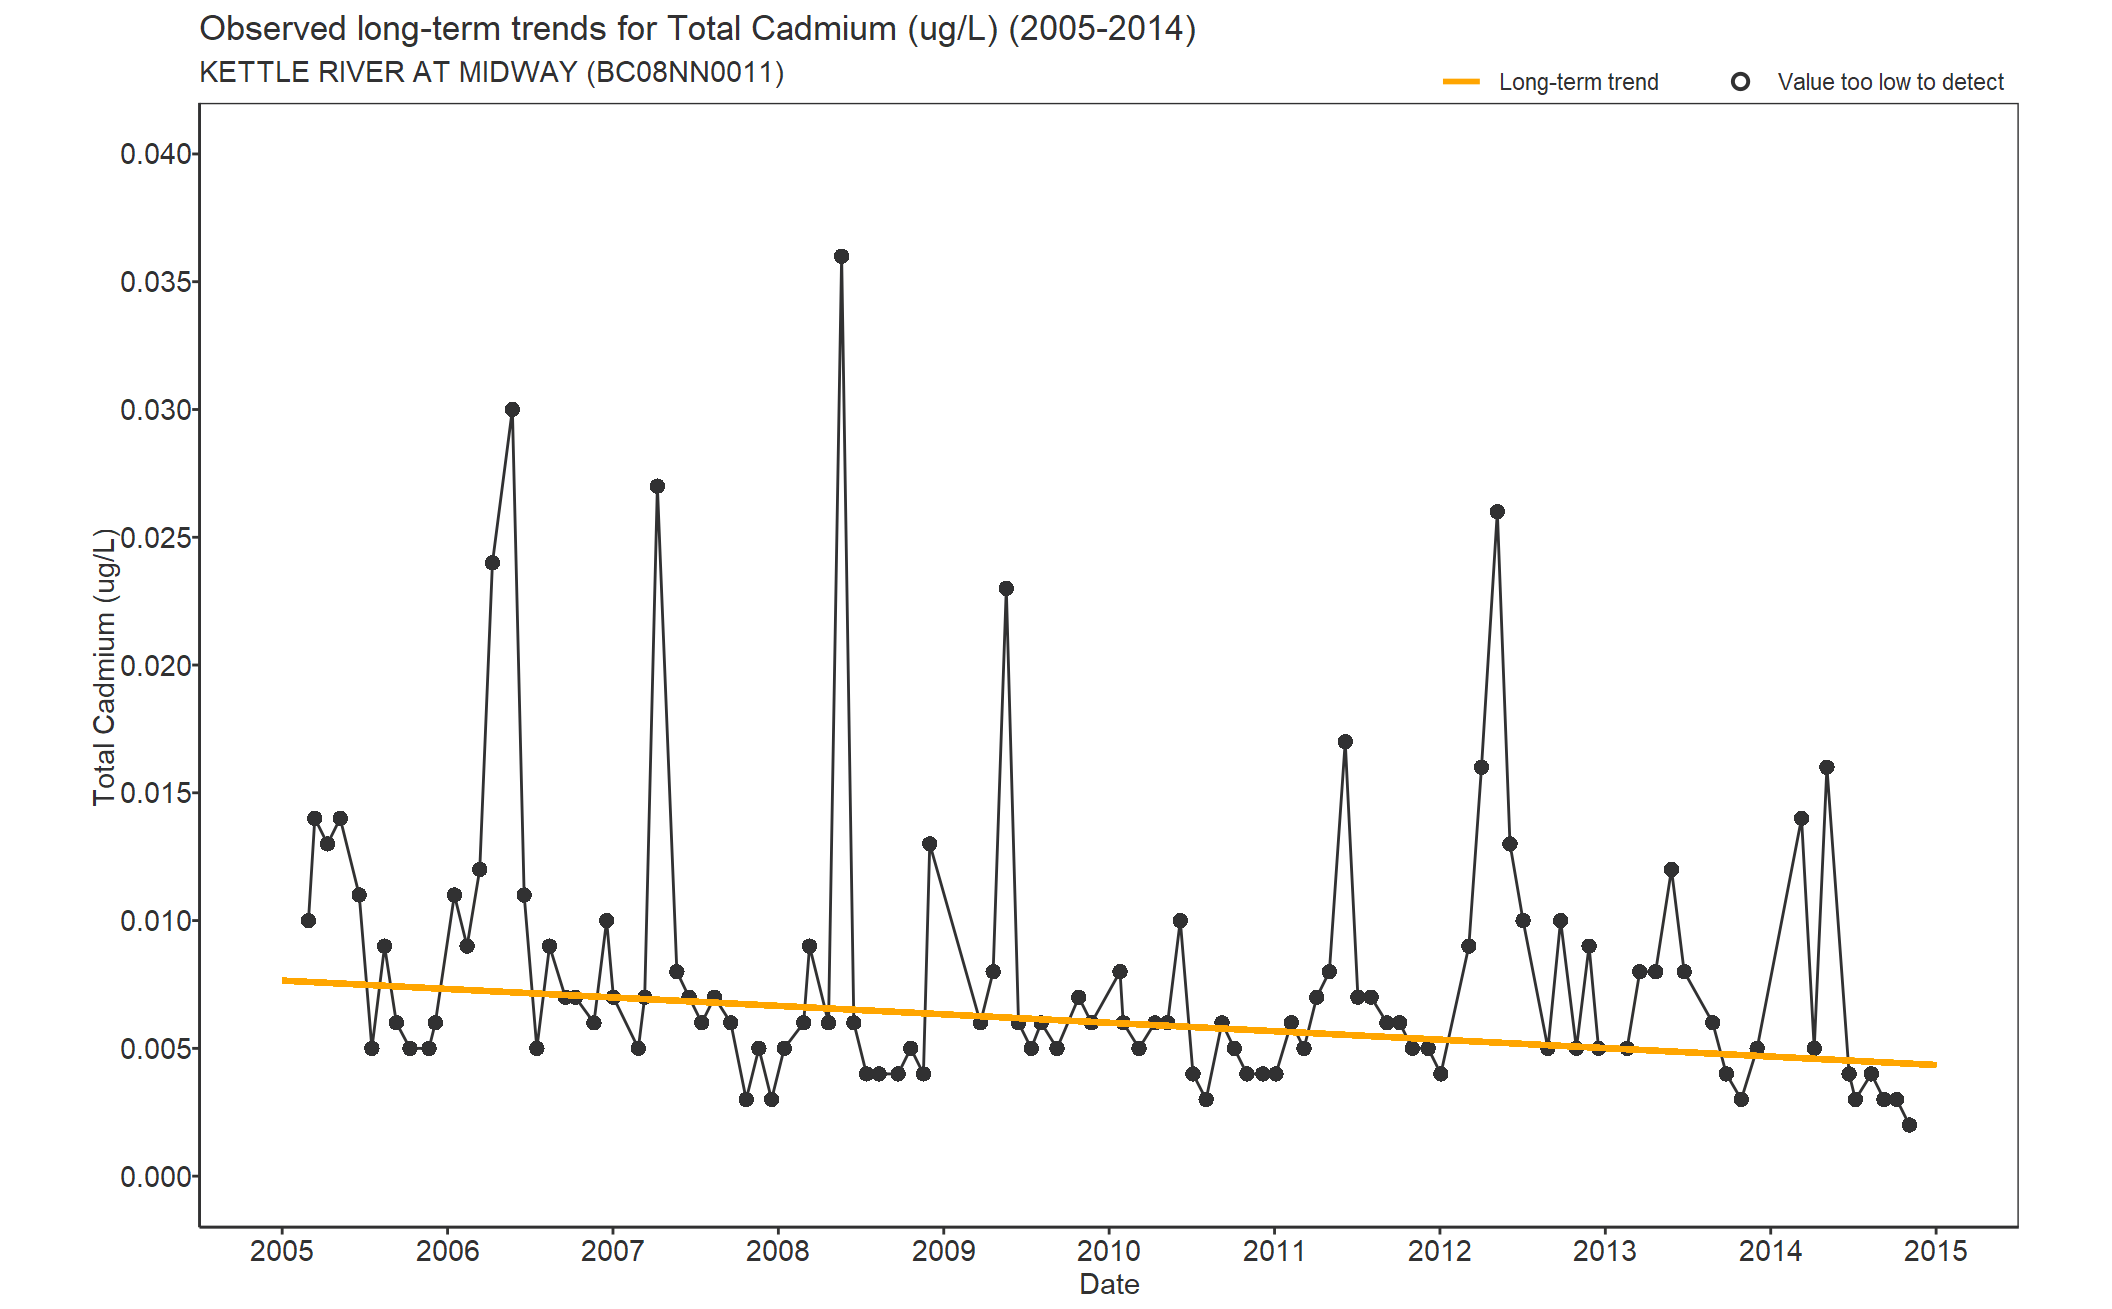 Observed long-term trends for Cadmium Total (2005-2014)